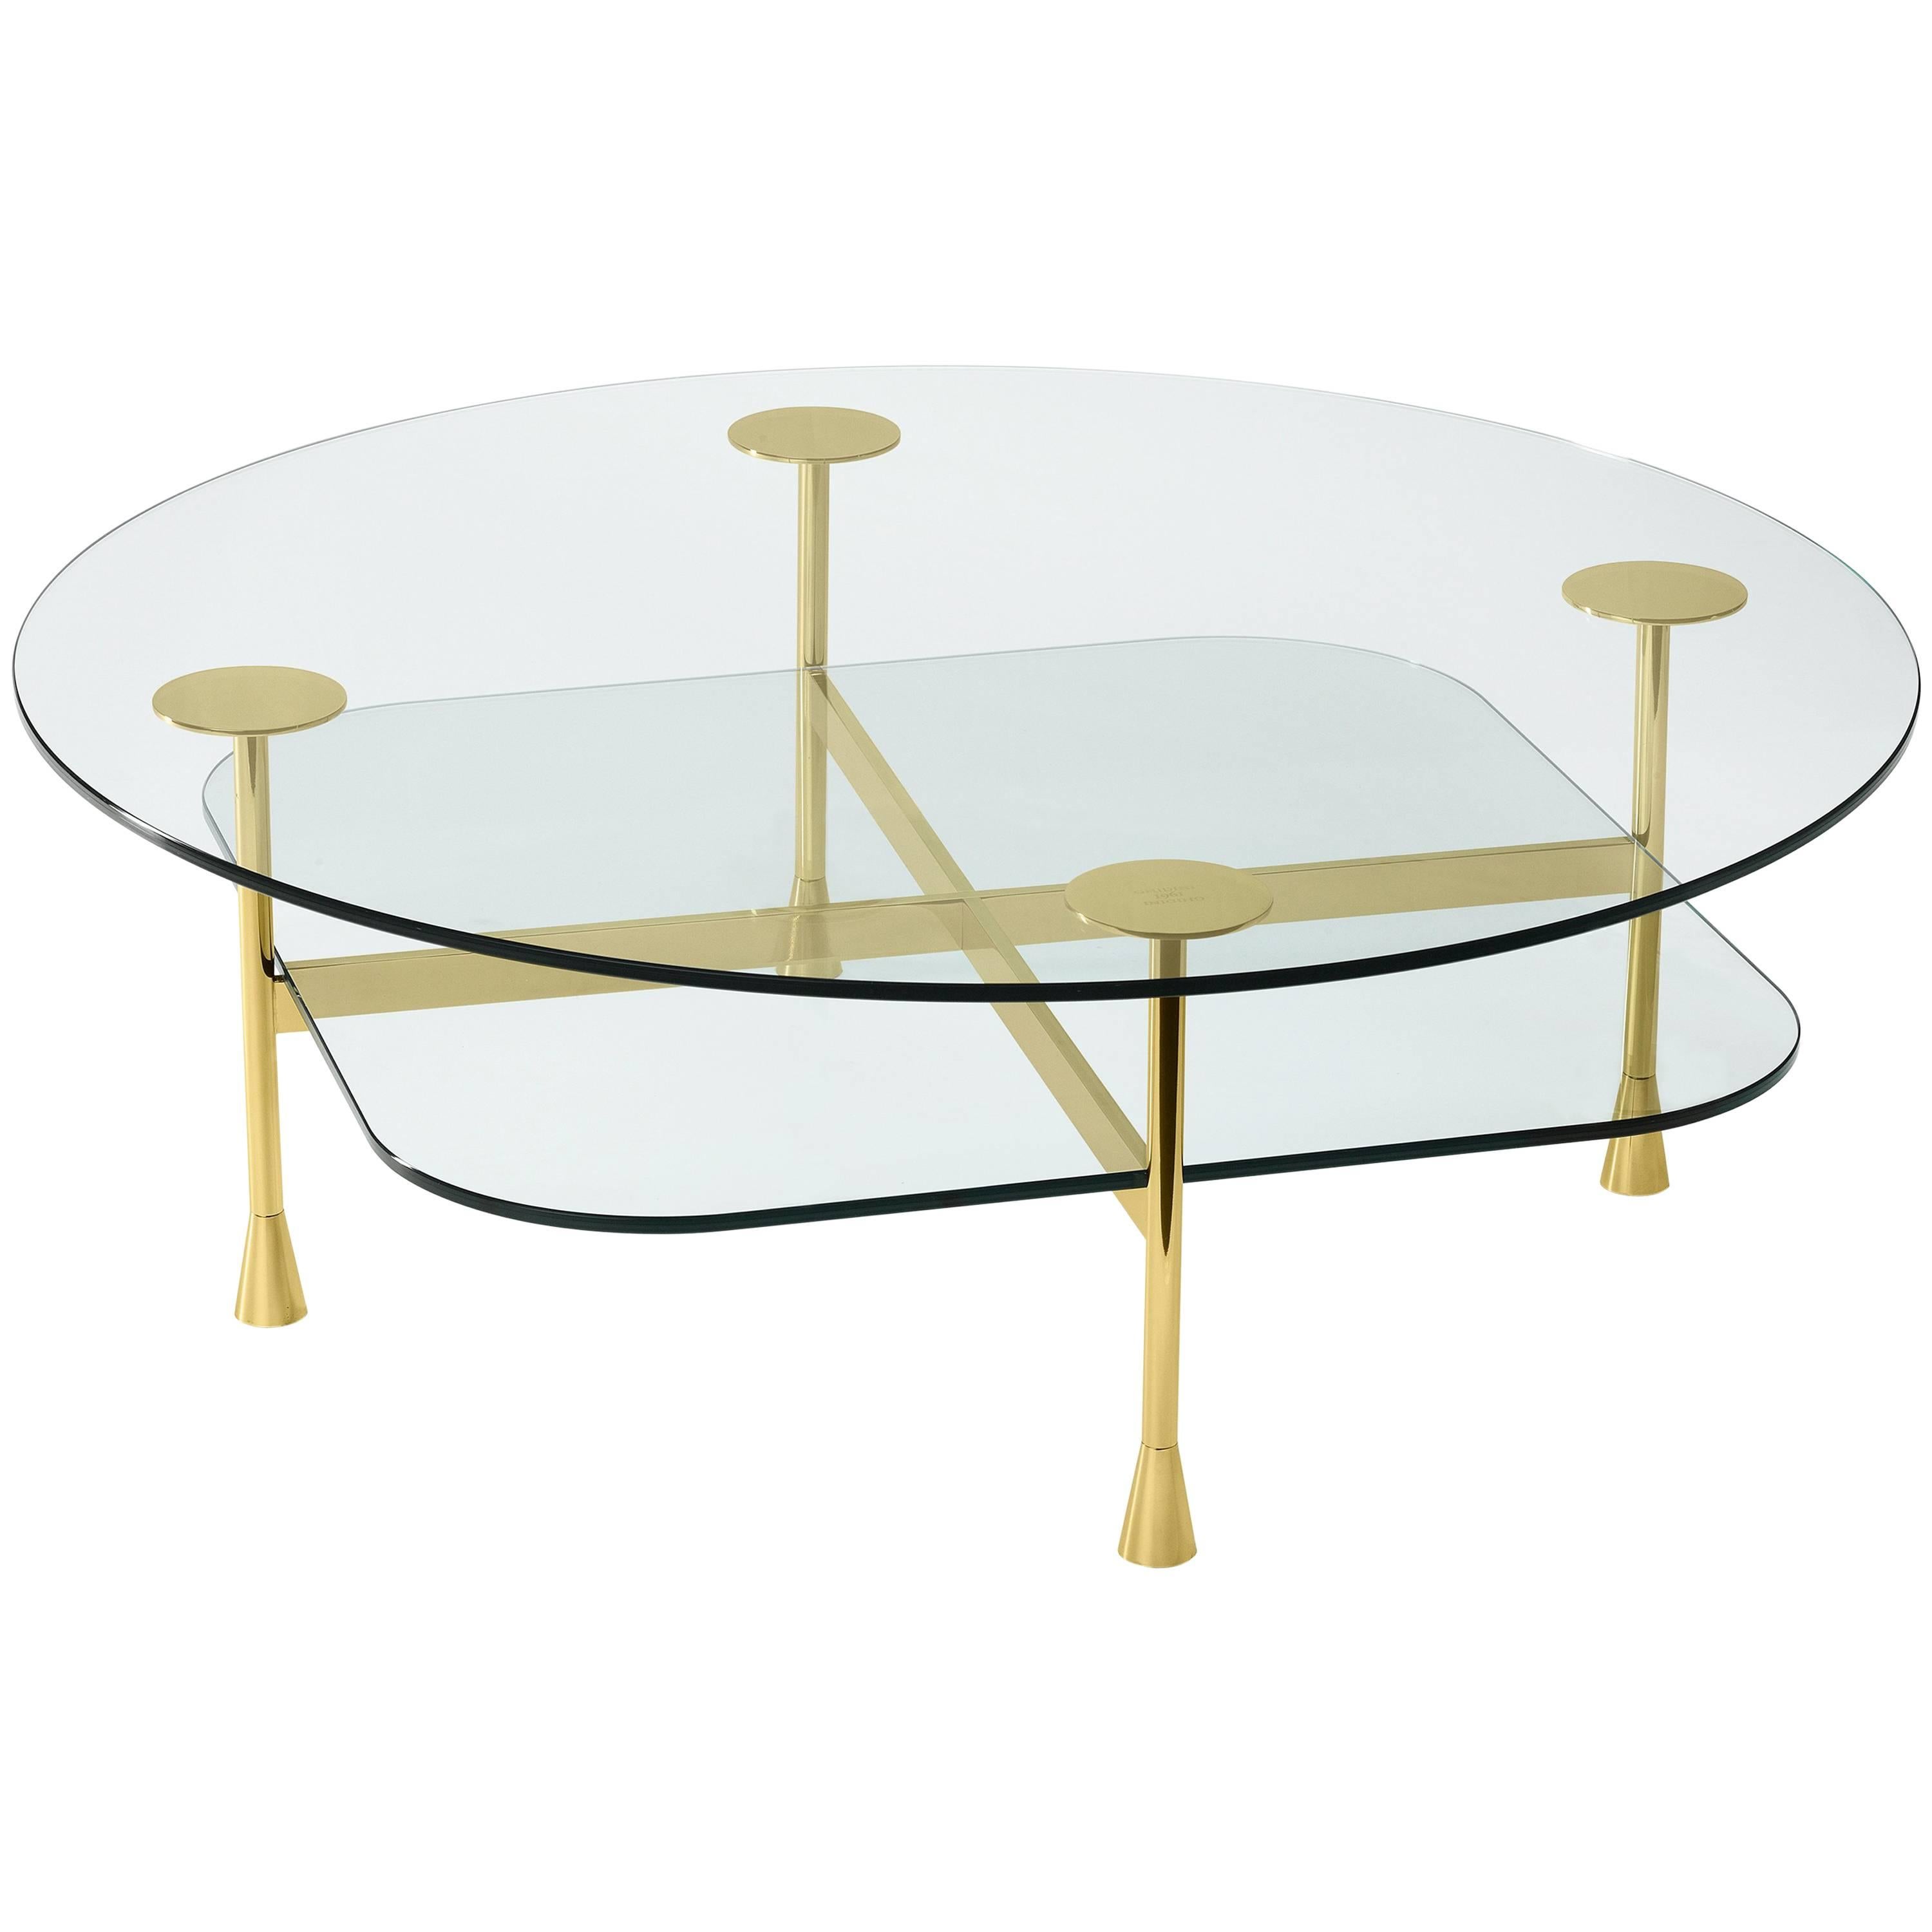 Ghidini 1961 Da Vinci Round Table in Glass and Polished Brass For Sale